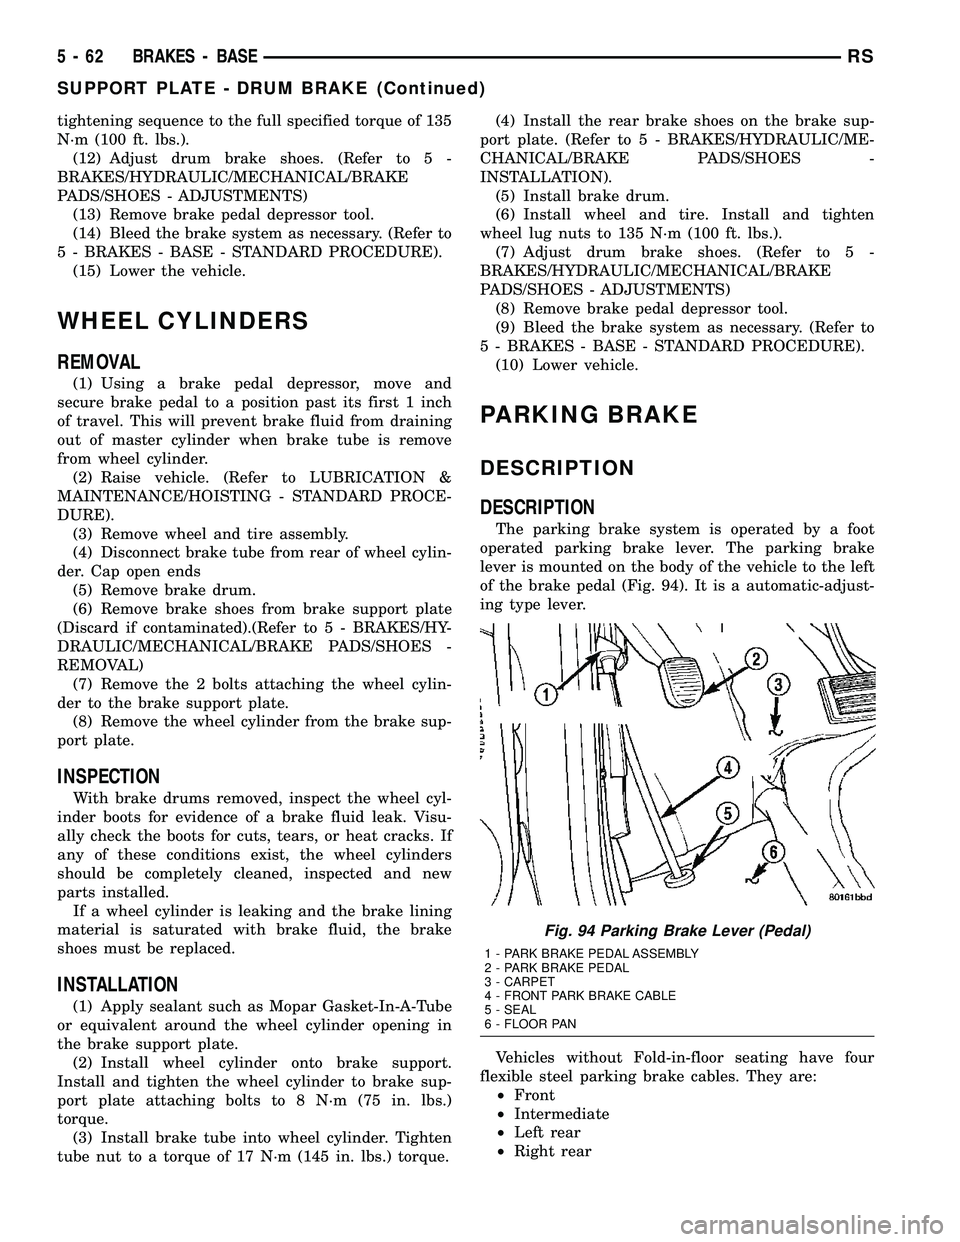 CHRYSLER CARAVAN 2005  Service Manual tightening sequence to the full specified torque of 135
N´m (100 ft. lbs.).
(12) Adjust drum brake shoes. (Refer to 5 -
BRAKES/HYDRAULIC/MECHANICAL/BRAKE
PADS/SHOES - ADJUSTMENTS)
(13) Remove brake p